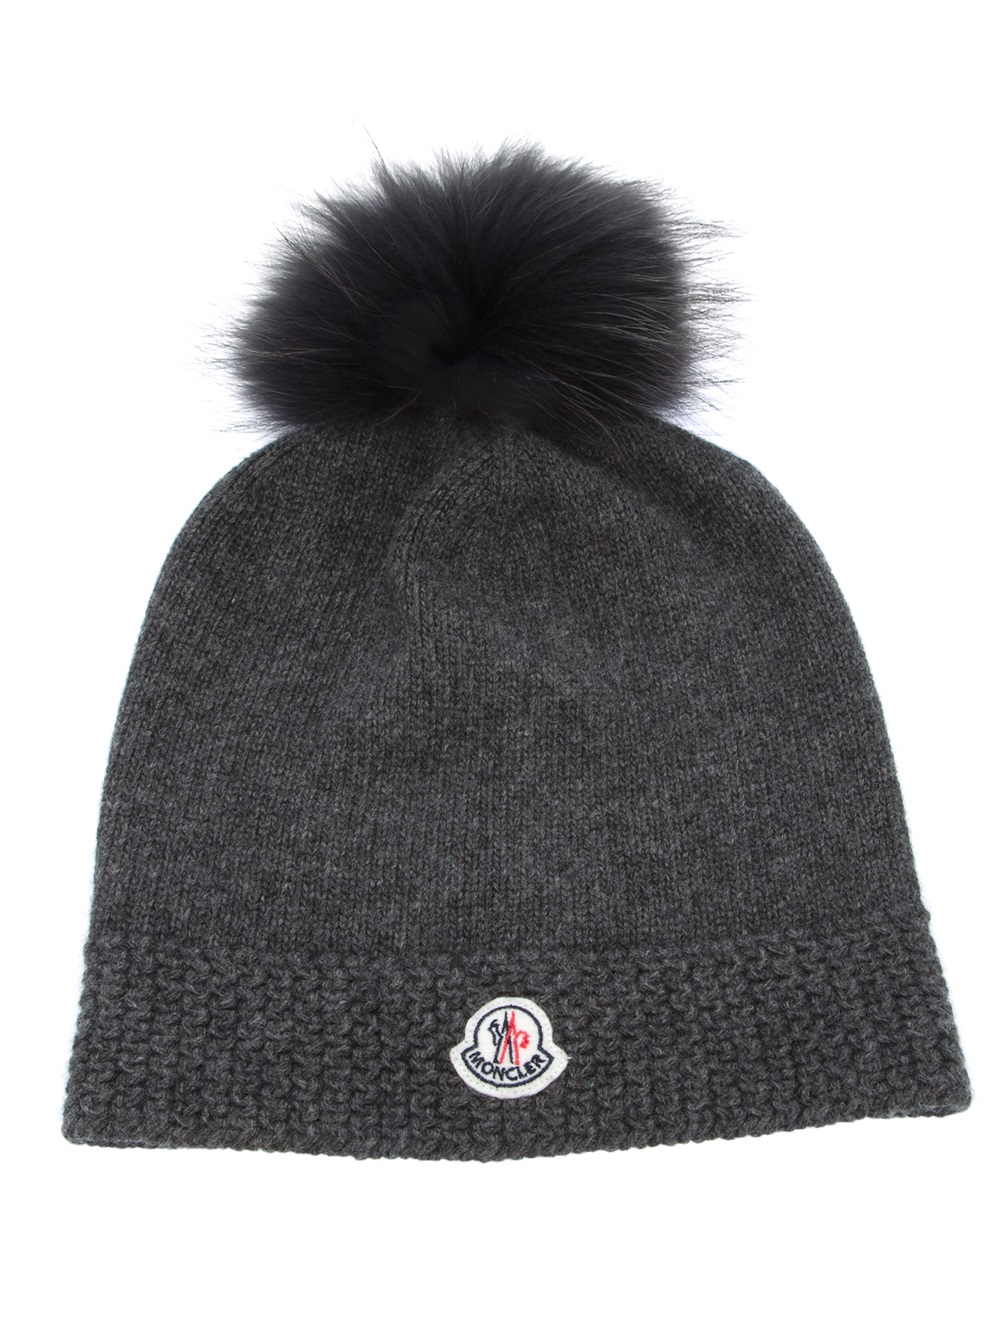 Lyst - Moncler Bobble Hat in Gray